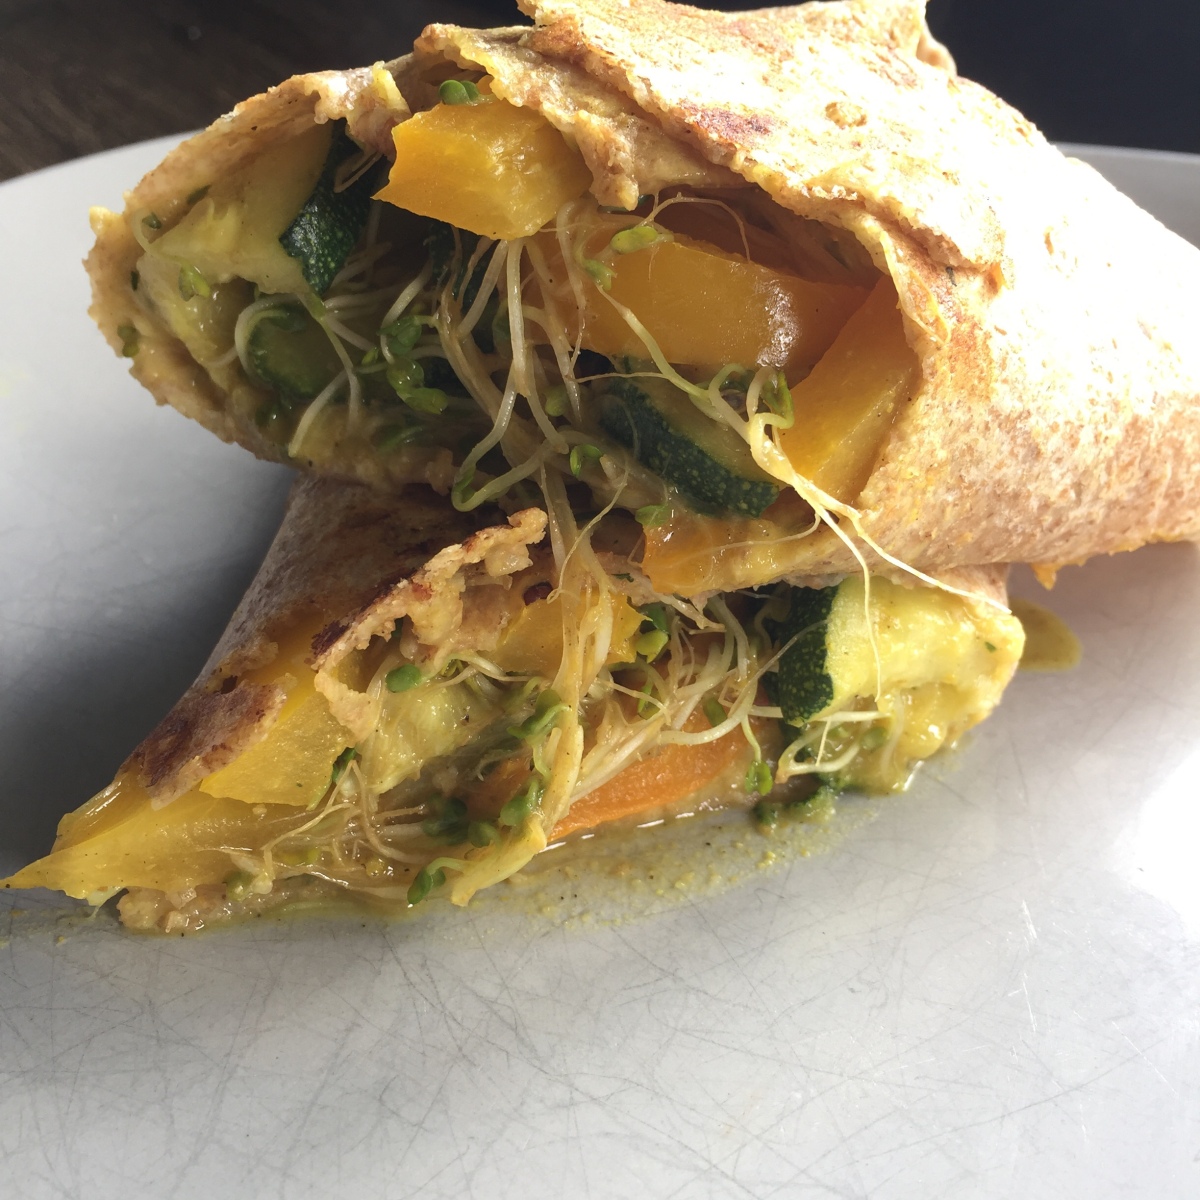 Toasty Curried Zucchini and Hummus Wraps